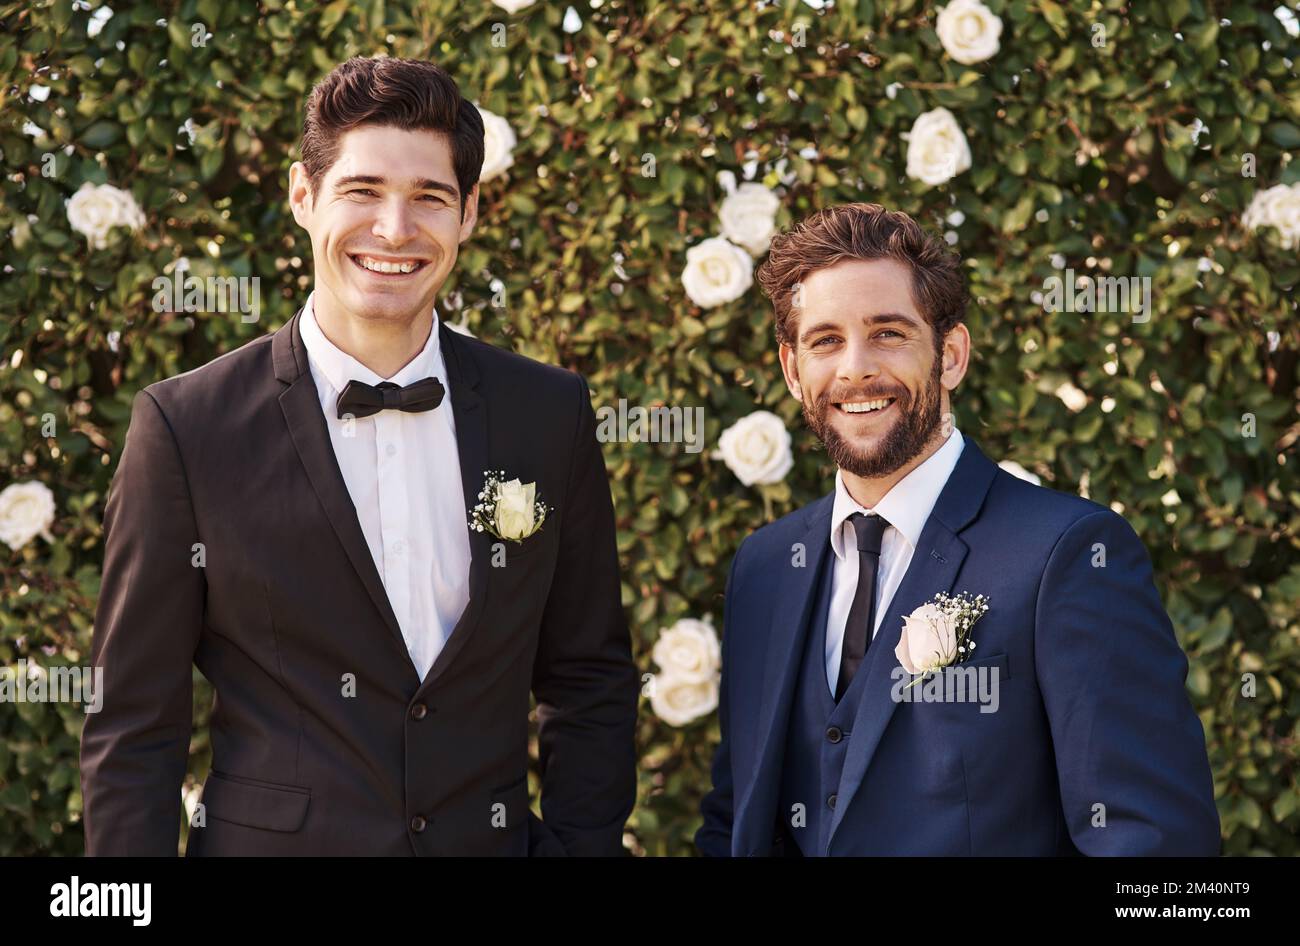 Hes going to stand by me as I say my vows. Cropped portrait of a handsome young bridegroom smiling while standing with his best man on his wedding day Stock Photo